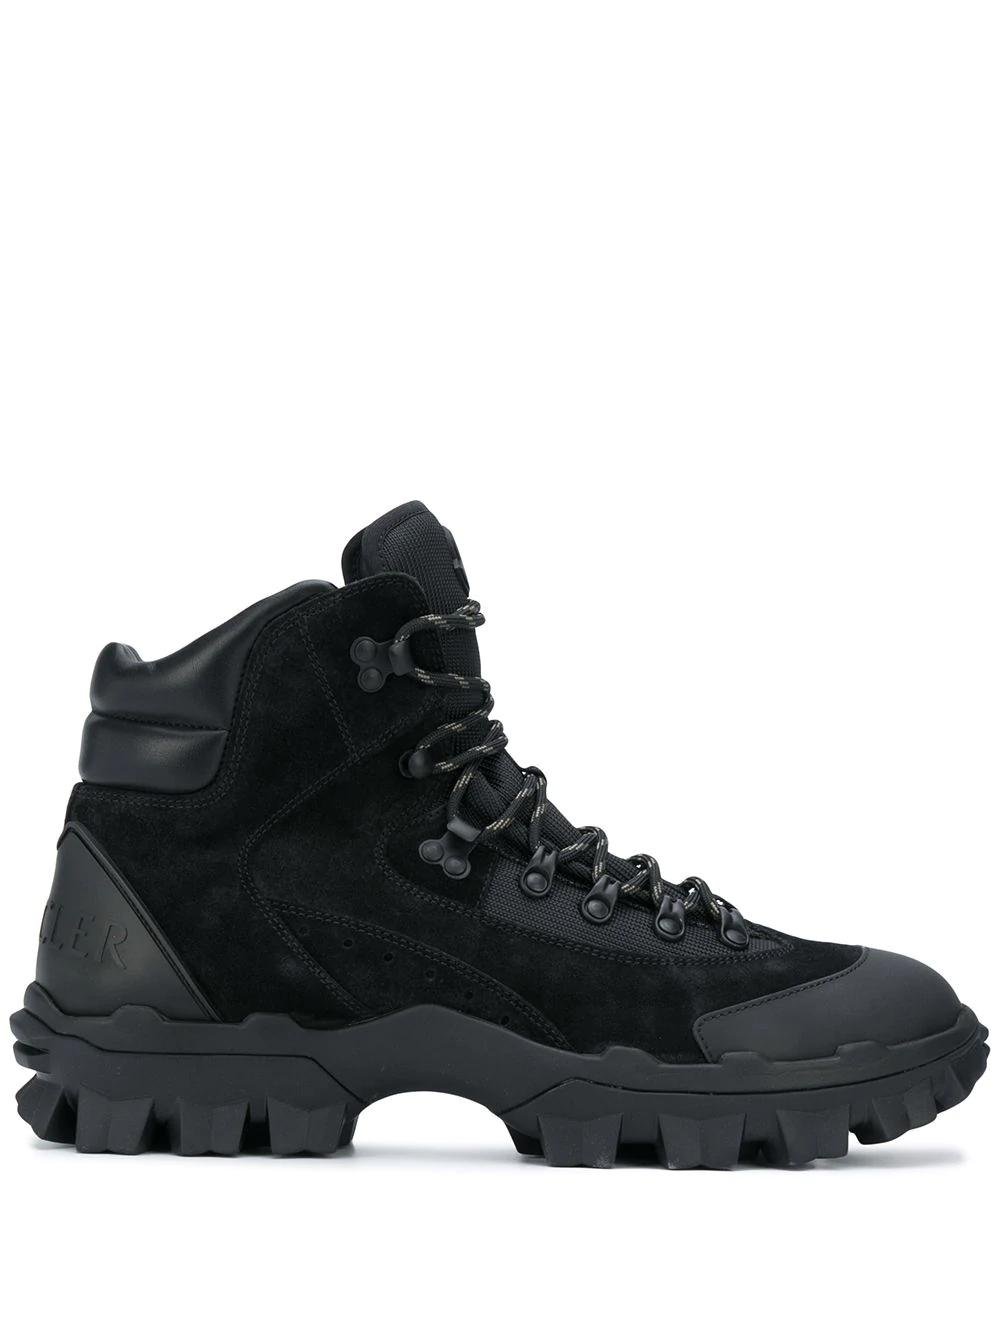 chunky-sole hiking boots by MONCLER | jellibeans